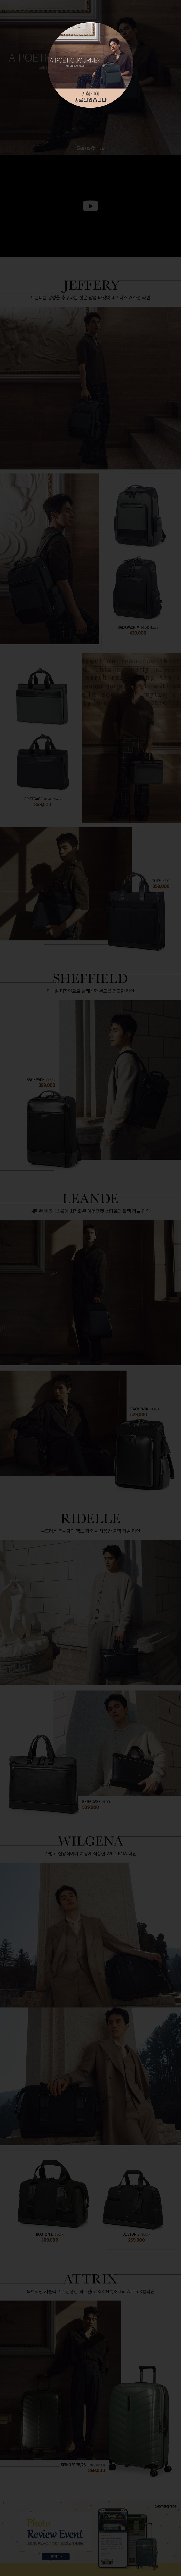 A POETIC JOURNEY with LEE DONG WOOK 기획전이 종료되었습니다